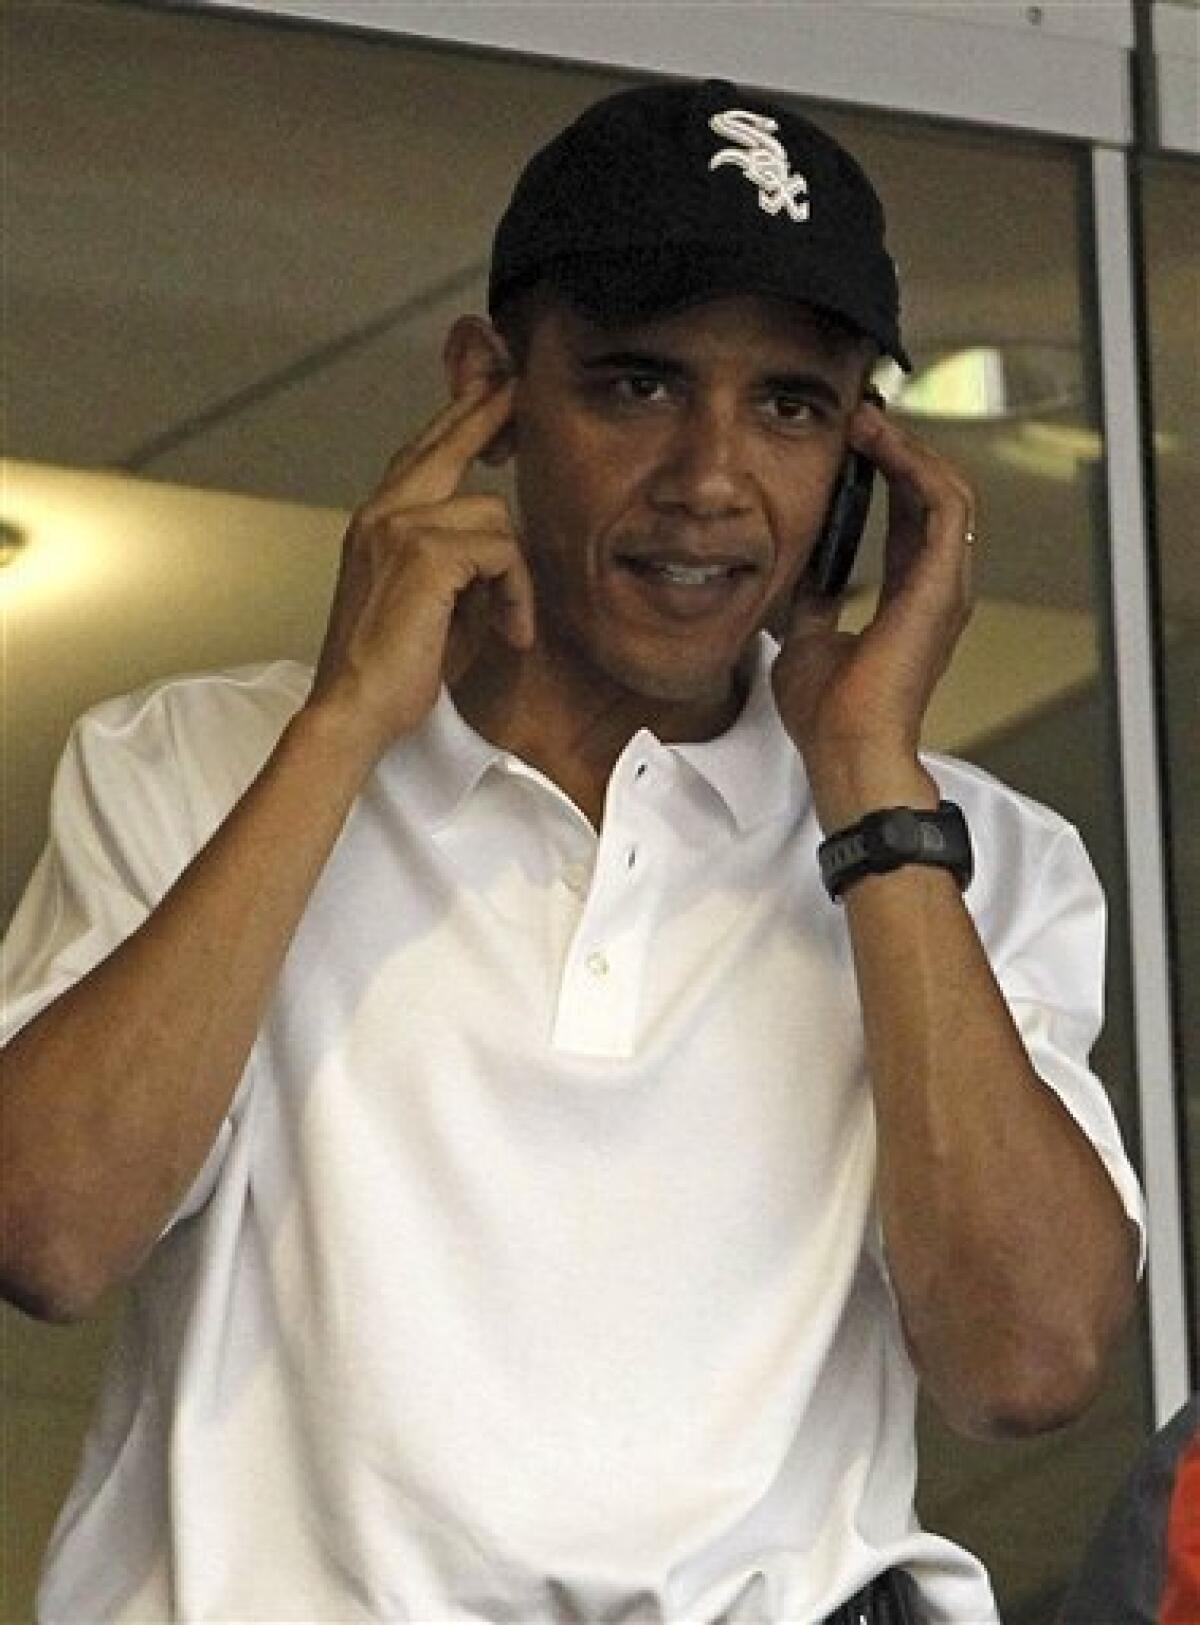 President Barack Obama, wearing a Chicago White Sox hat, talks on a phone during a baseball game between the Washington Nationals and Chicago White Sox, Friday, June 18, 2010, in Washington. (AP Photo/Haraz N. Ghanbari)